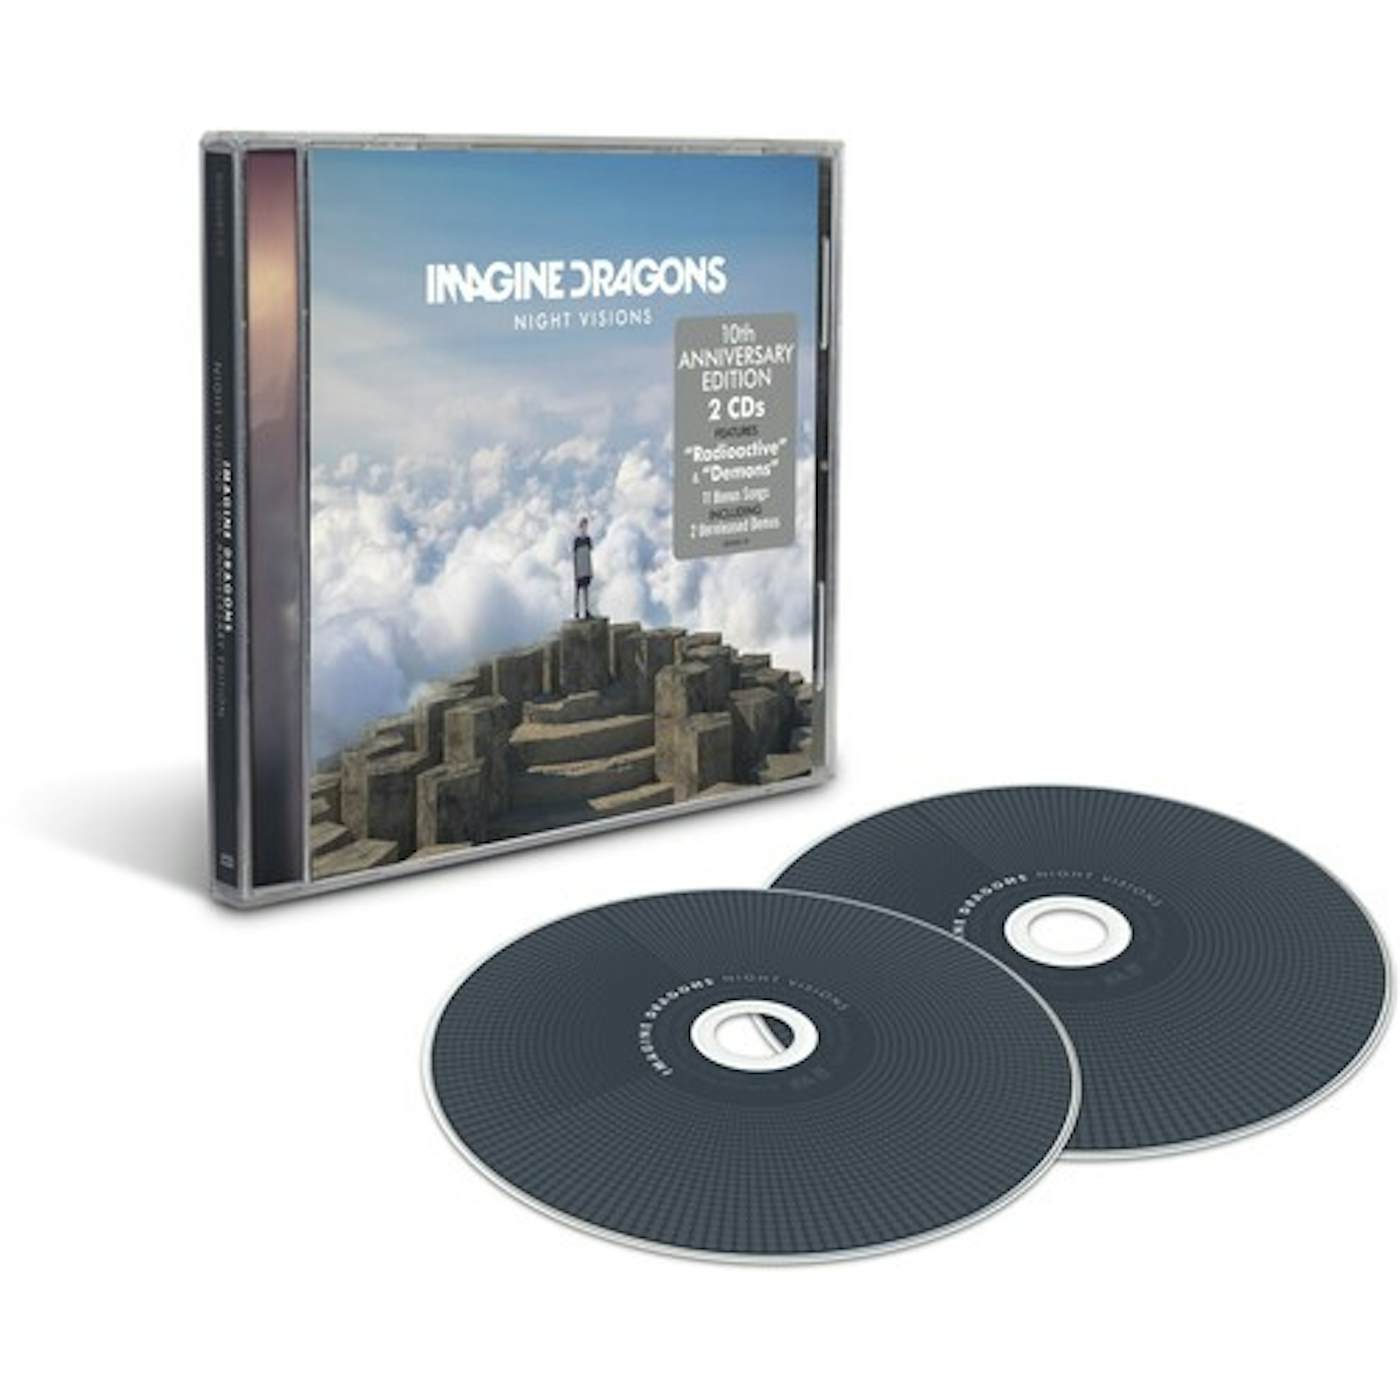 Imagine Dragons NIGHT VISIONS: EXPANDED EDITION CD